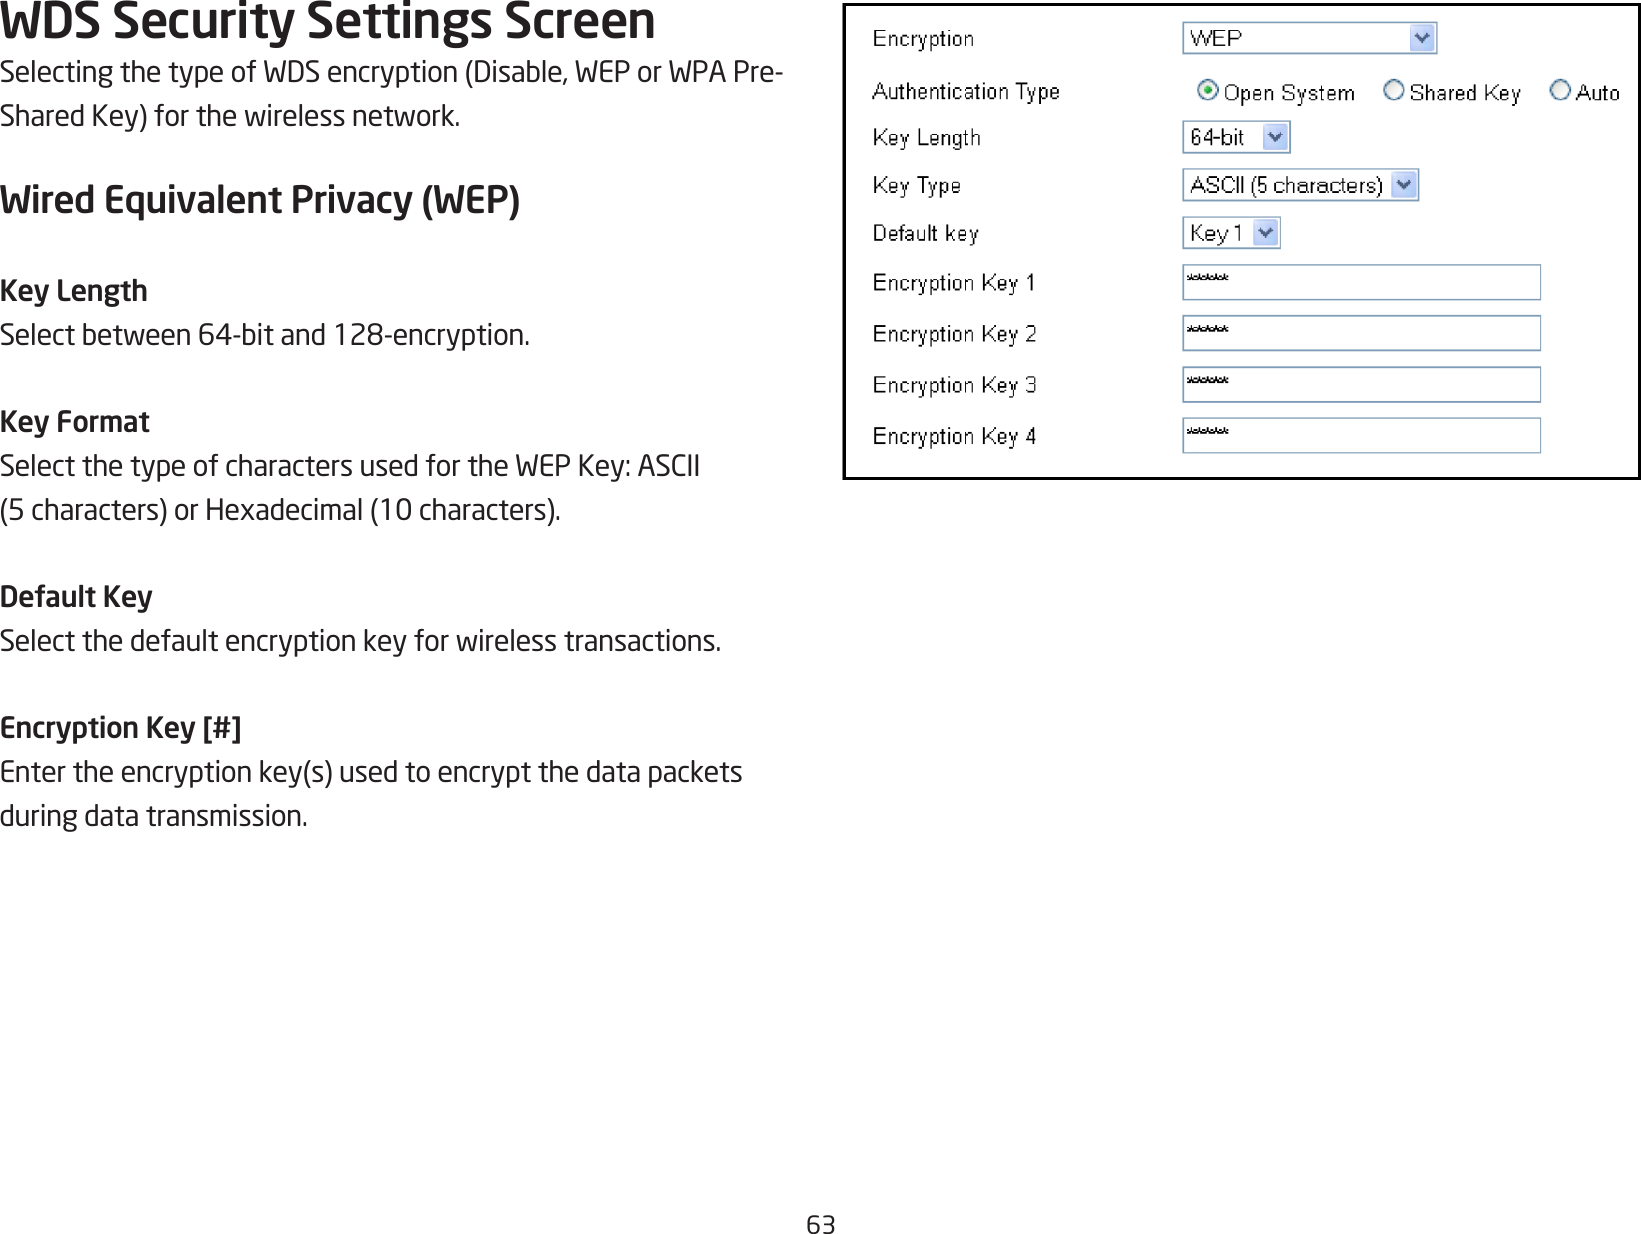 63WDS Security Settings ScreenSelectingthetypeofWDSencryption(Disable,WEPorWPAPre-SharedKey)forthewirelessnetwork.Wired Equivalent Privacy (WEP)Key LengthSelectbetween64-bitand128-encryption.Key FormatSelectthetypeofcharactersusedfortheWEPKey:ASCII(5characters)orHexadecimal(10characters).Default KeySelectthedefaultencryptionkeyforwirelesstransactions.Encryption Key [#]Entertheencryptionkey(s)usedtoencryptthedatapacketsduring data transmission.